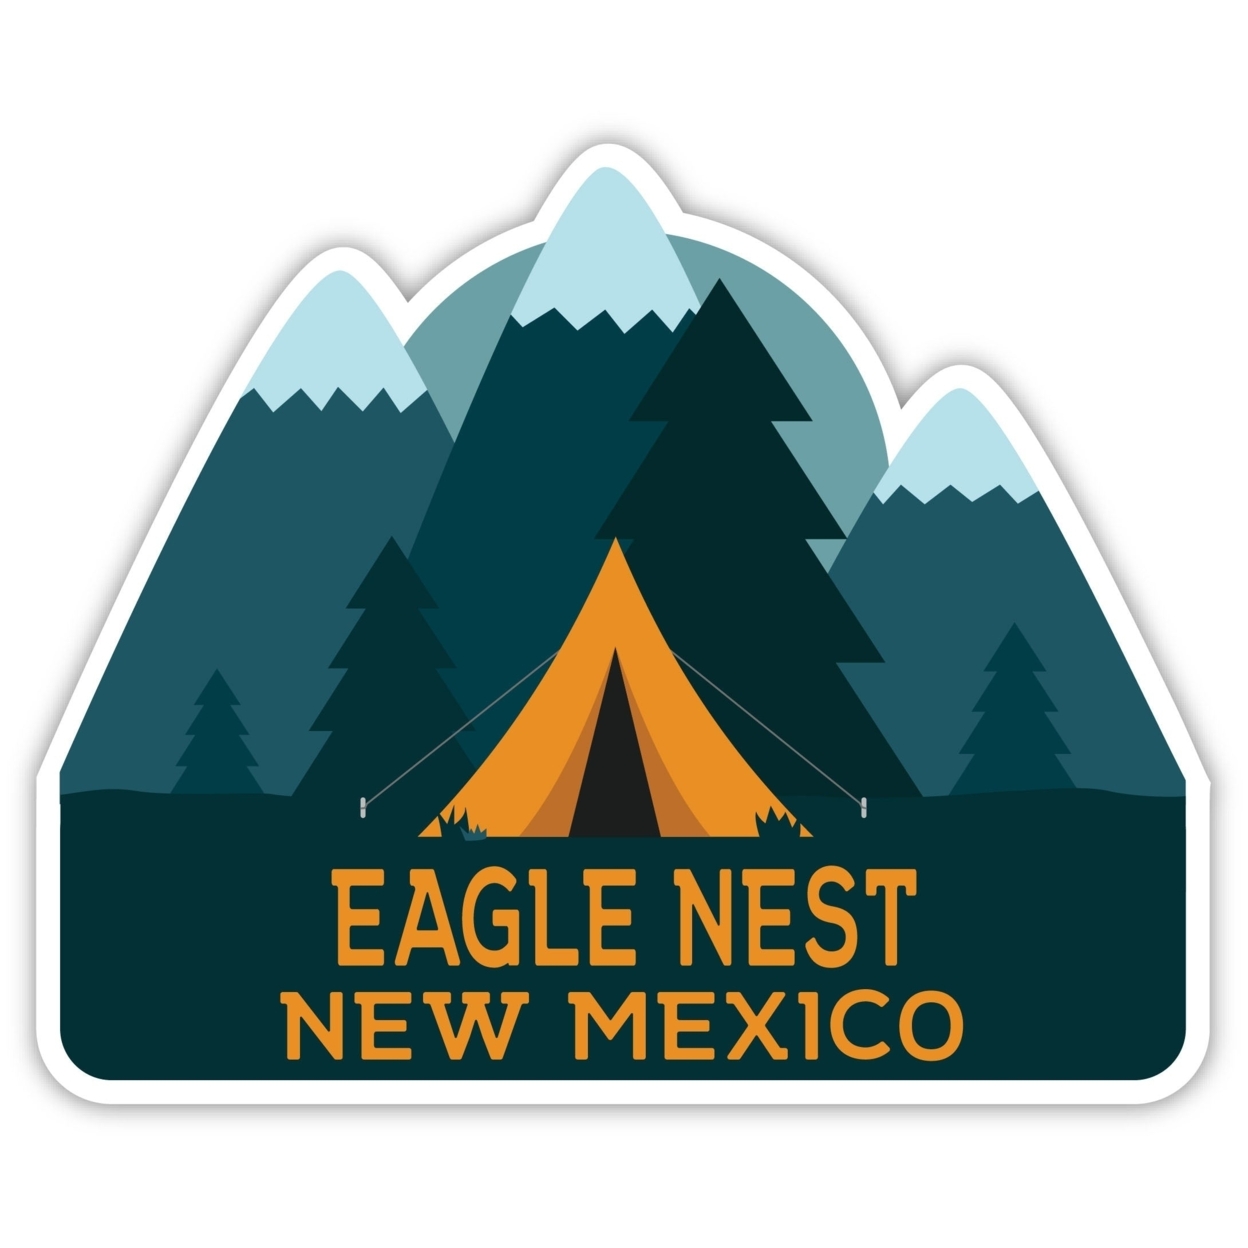 Eagle Nest New Mexico Souvenir Decorative Stickers (Choose Theme And Size) - 4-Pack, 4-Inch, Tent